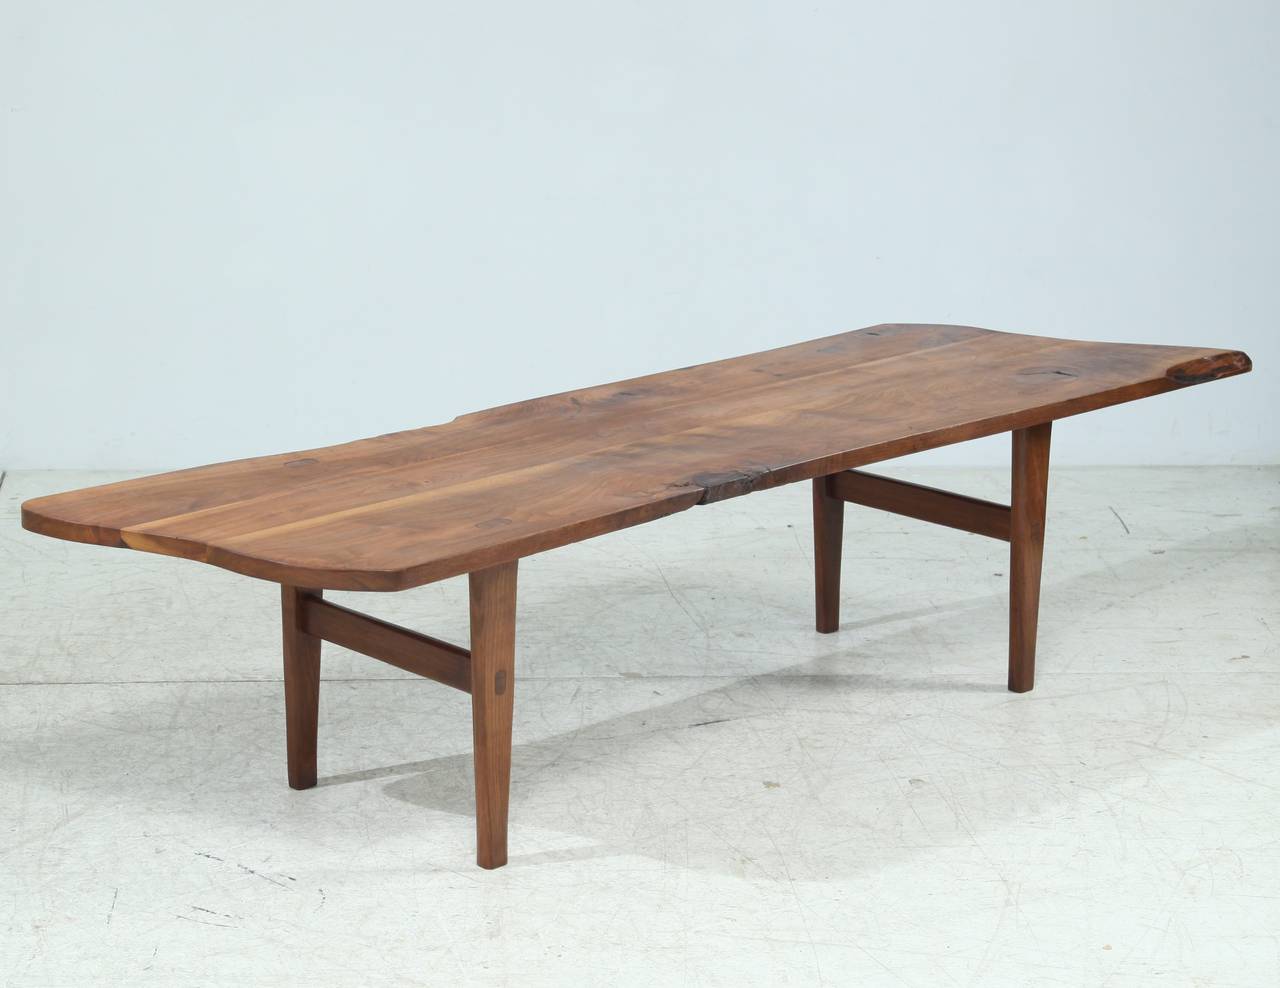 A spectacular handmade walnut bench made by an American woodworker. The wood has a warm color and has aged beautifully. The rough texture of the top contrasts nicely with the more smooth legs.